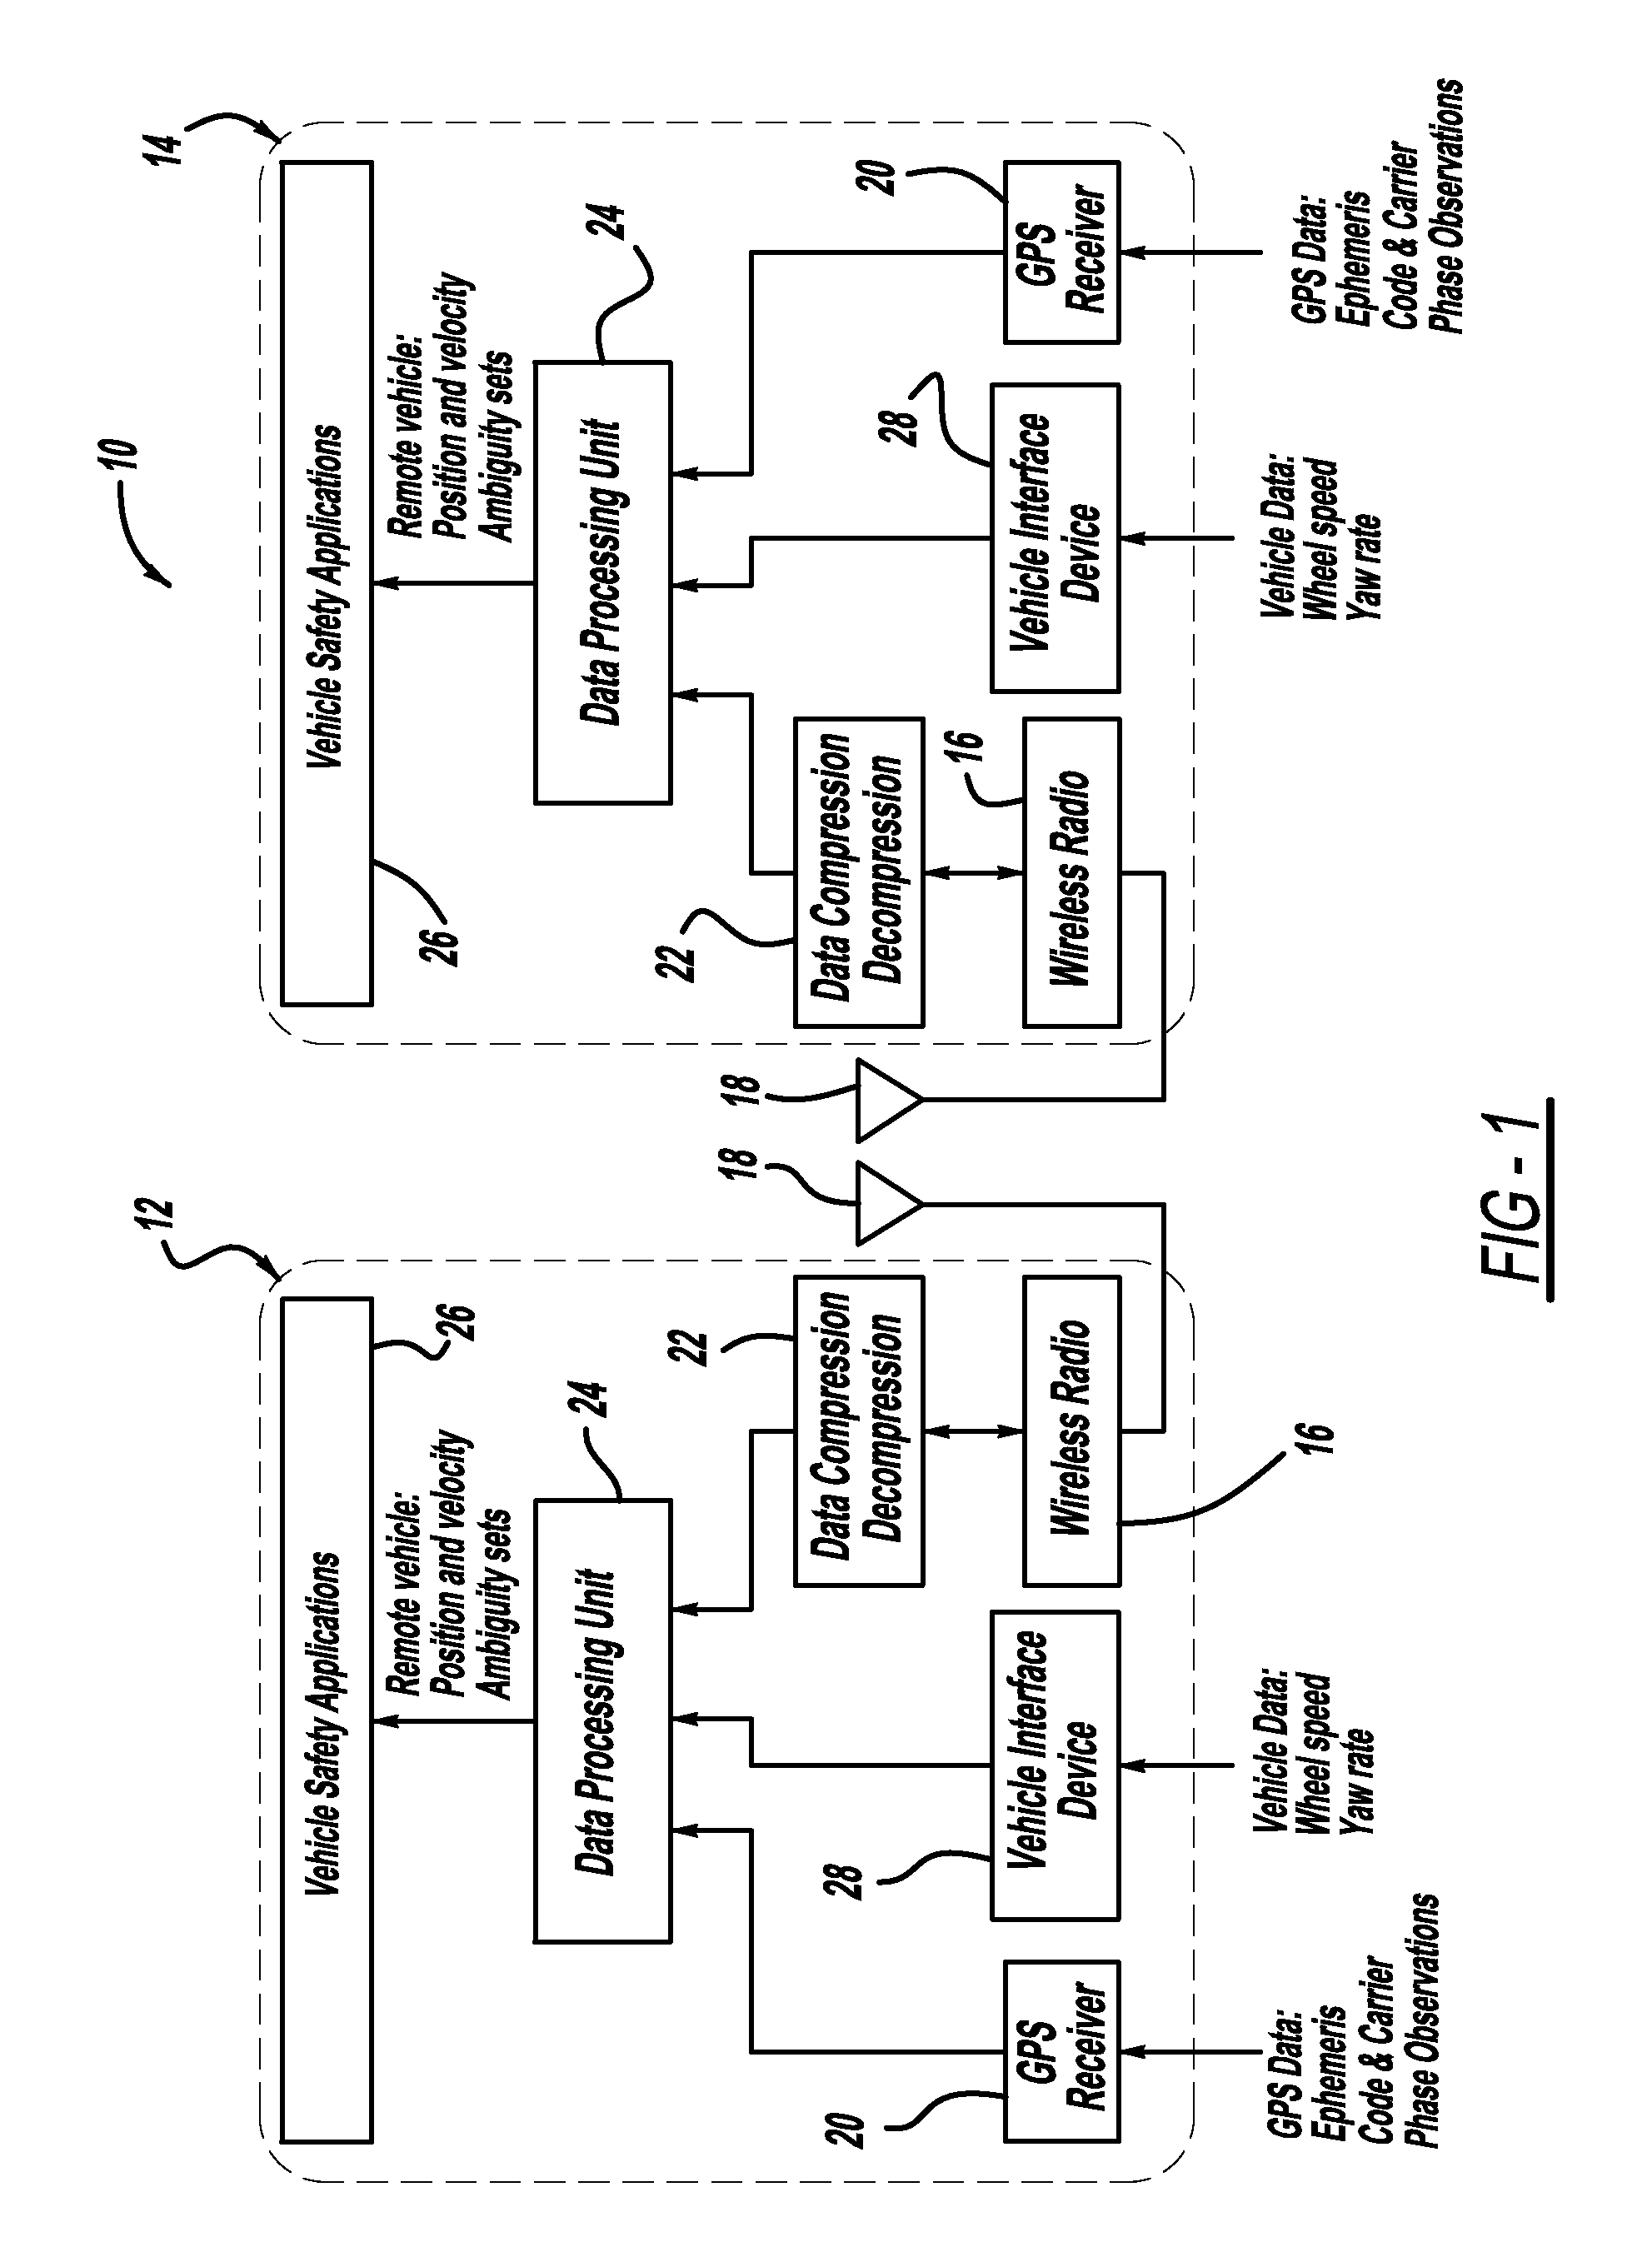 Method and apparatus for precise relative positioning in multiple vehicles